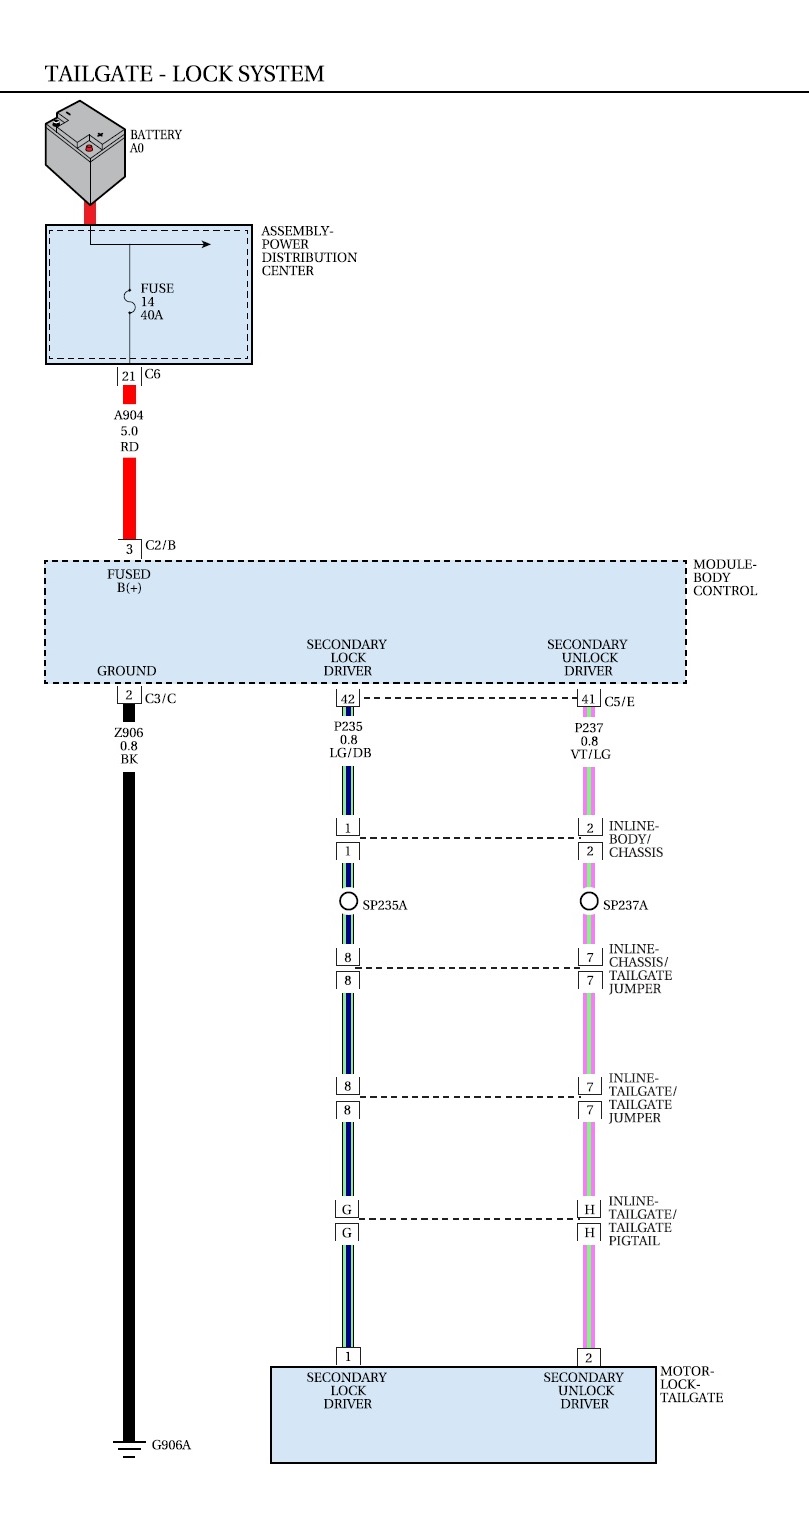 Wiring Diagram For Dodge Ram 1500 from www.supermotors.net